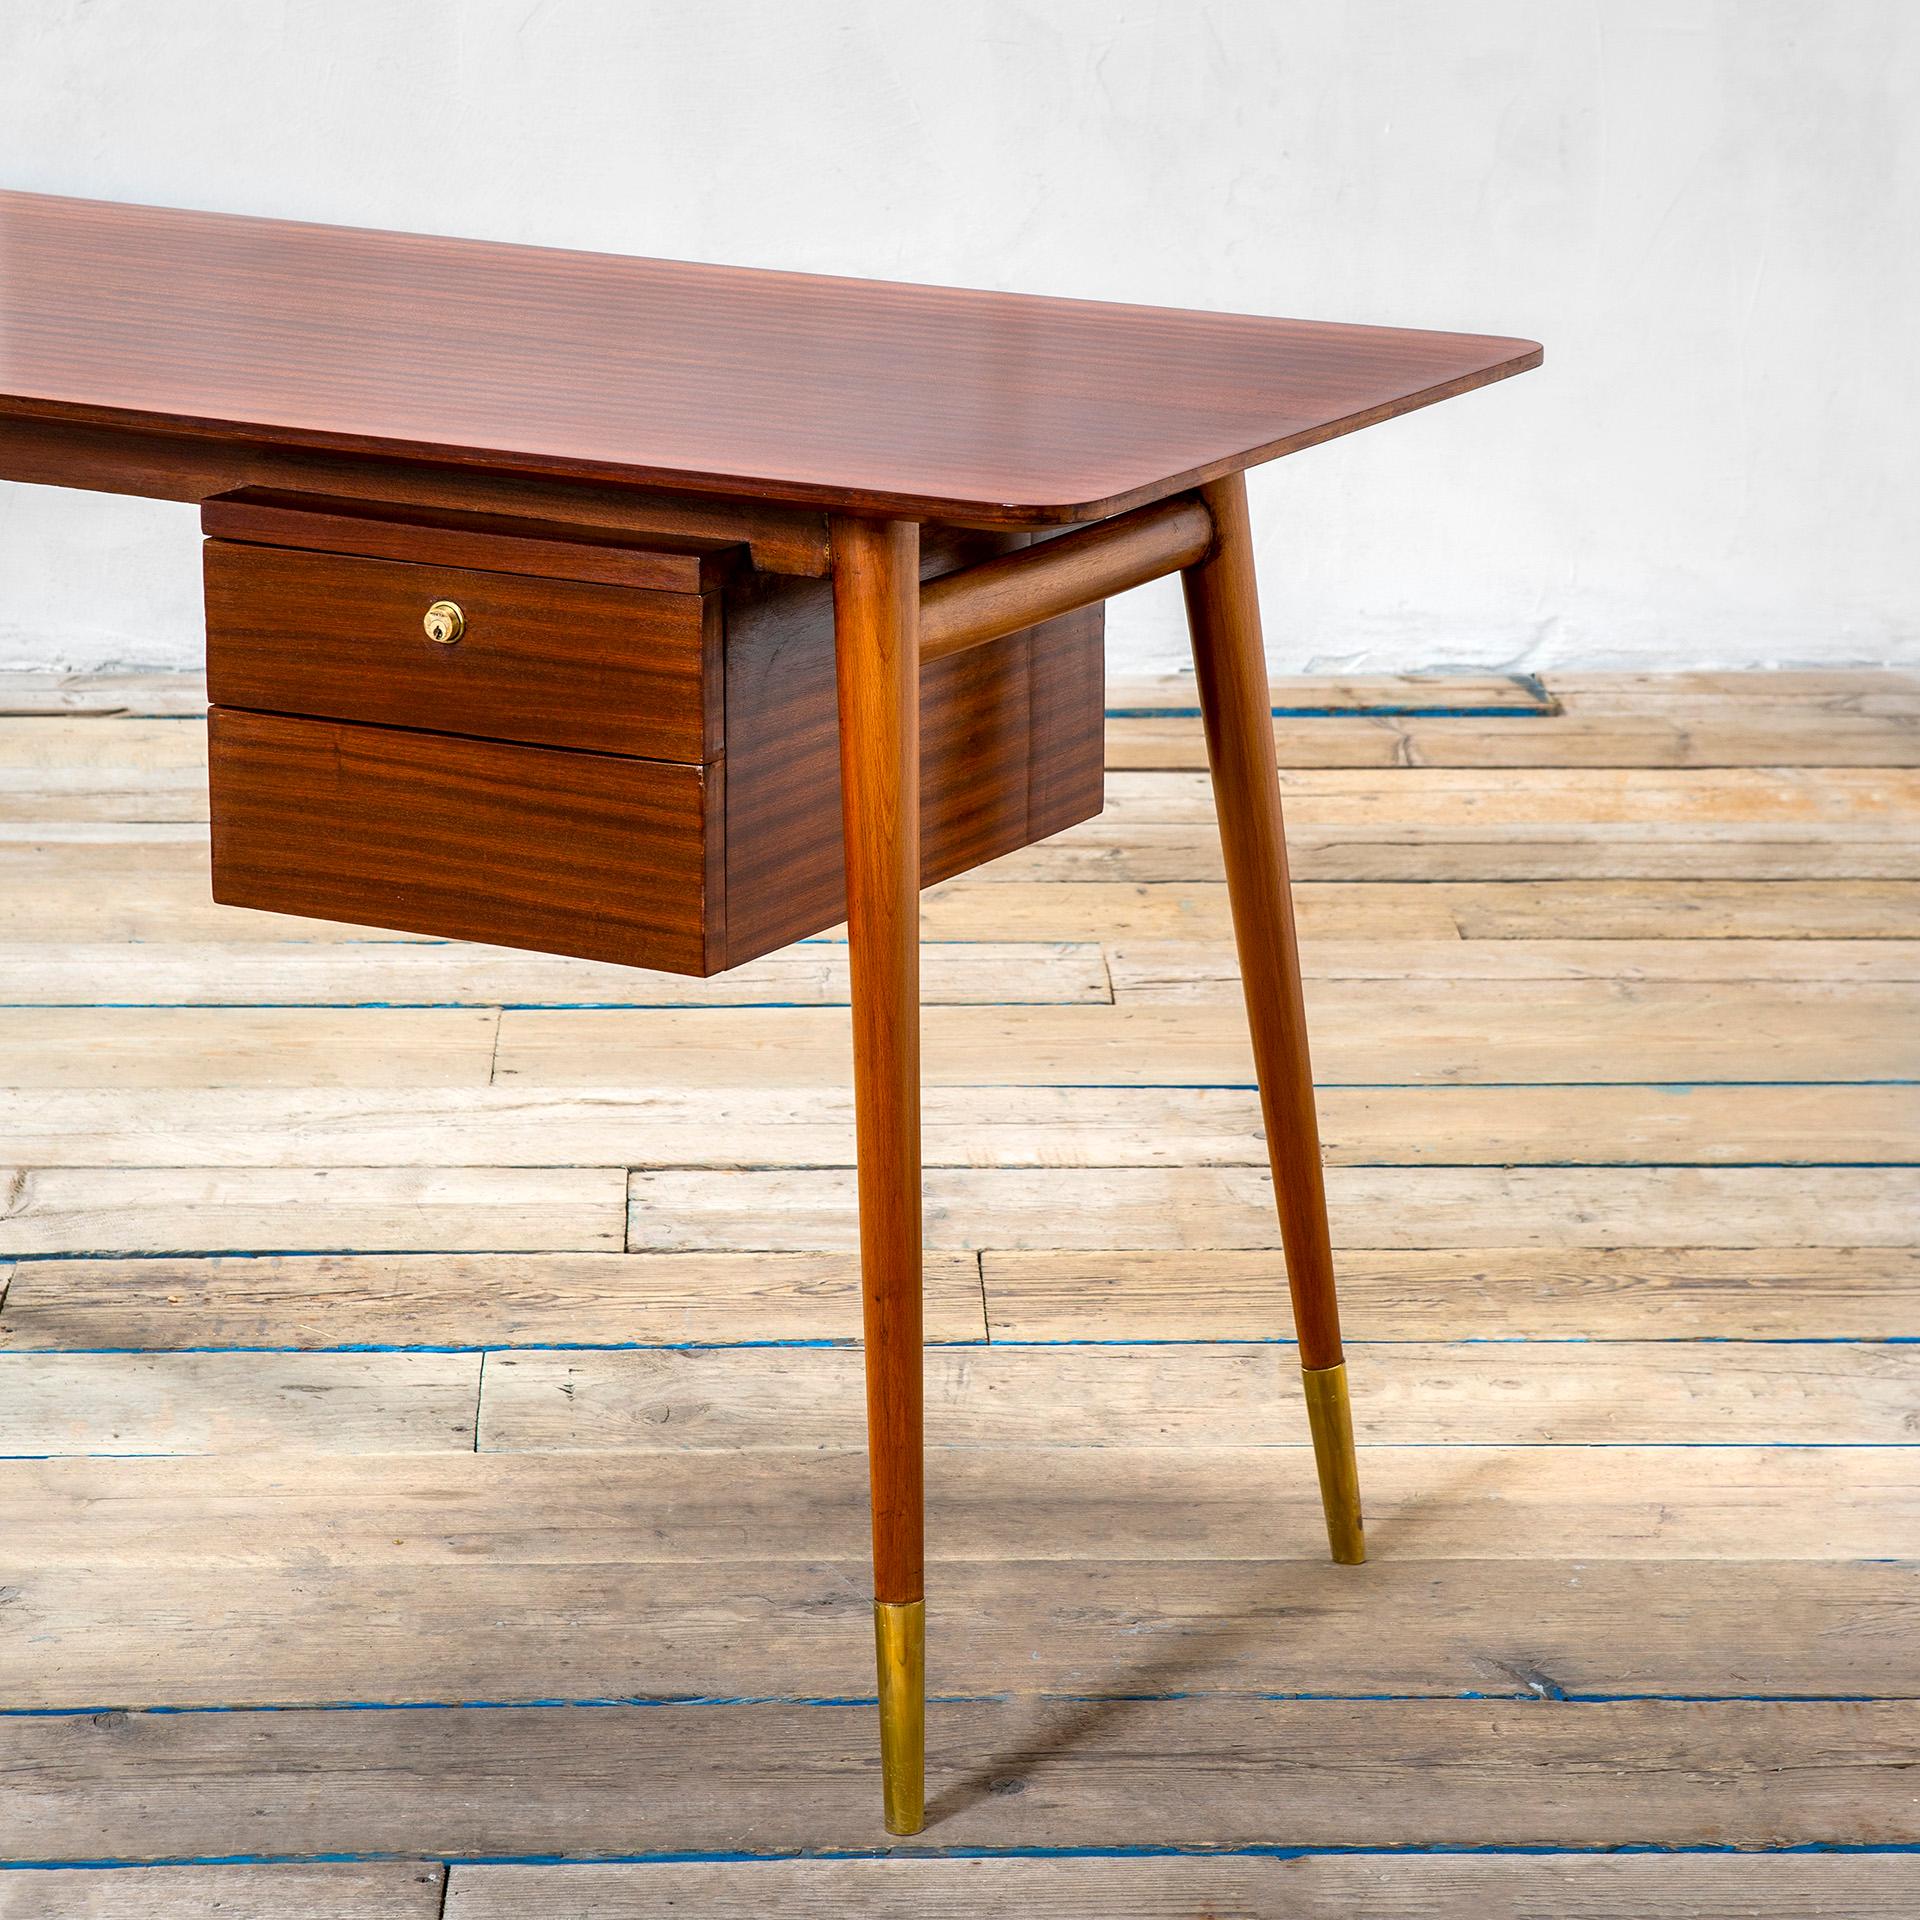 Italian 20th Century Melchiorre Bega Desk with wooden structure, drawers Brass details For Sale